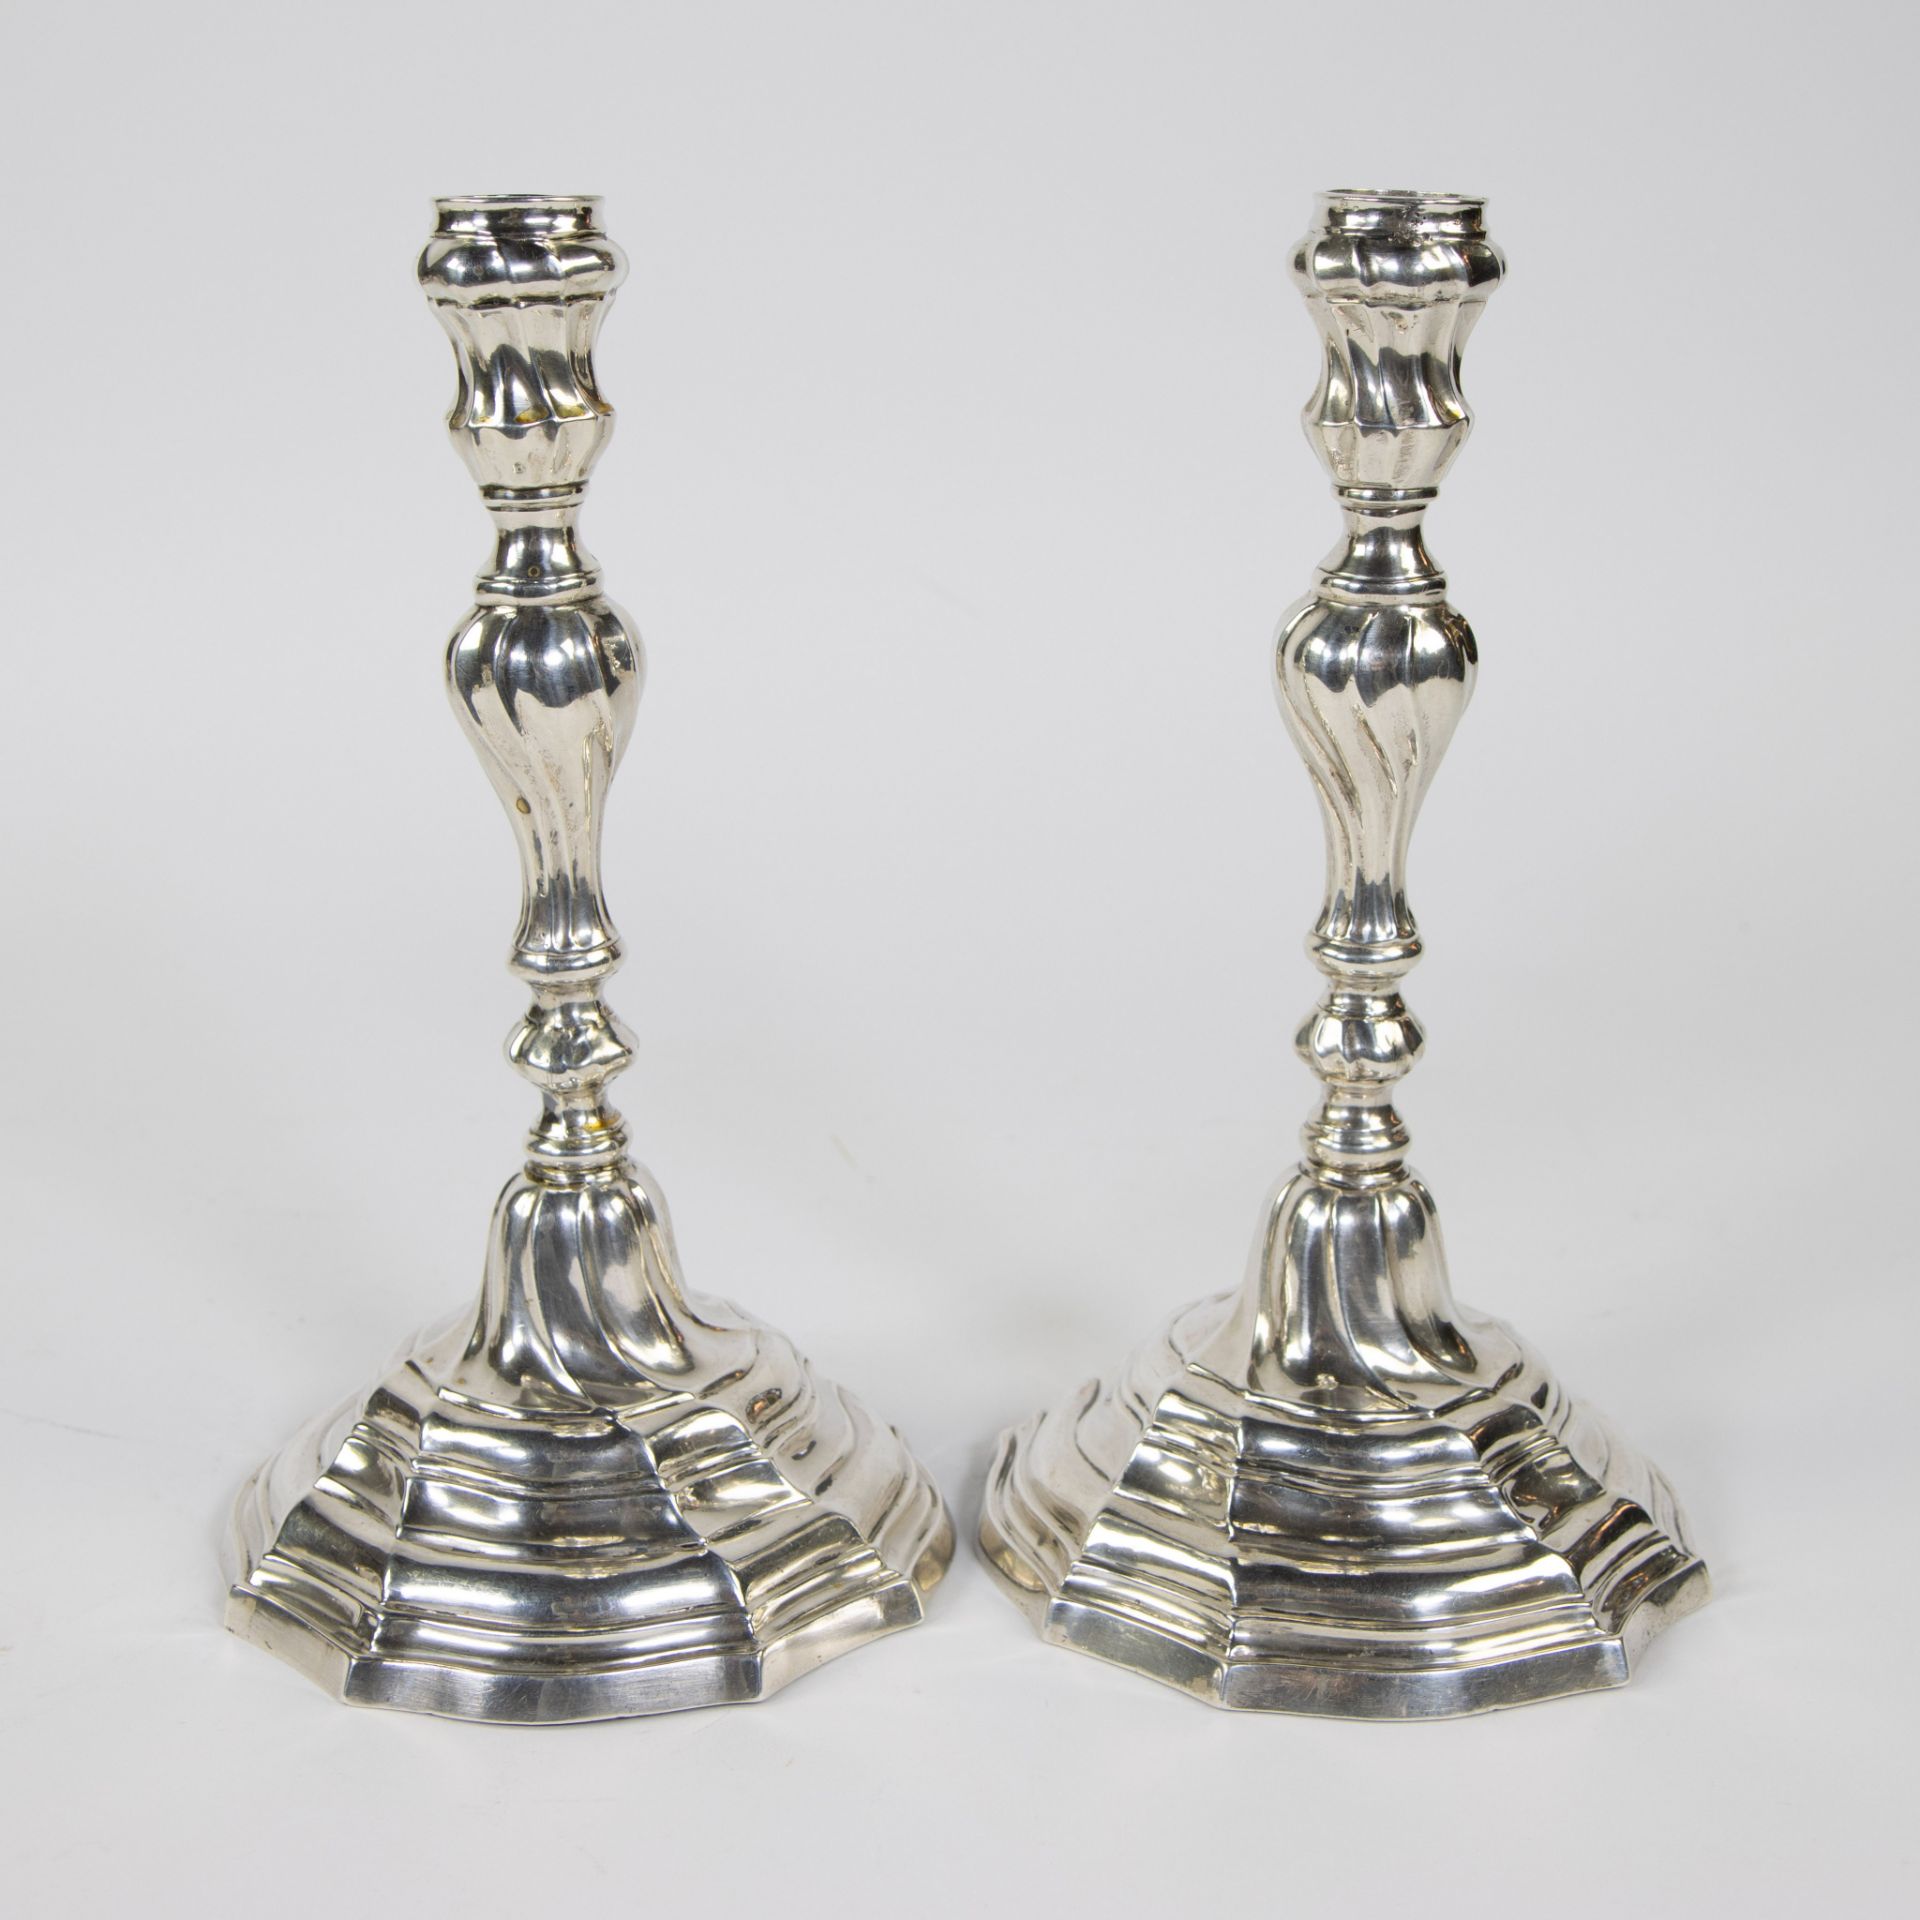 Ghent Louis XV candlesticks, twisted, silver 1774, silversmith Joannes Baptista Paulus - Image 4 of 5